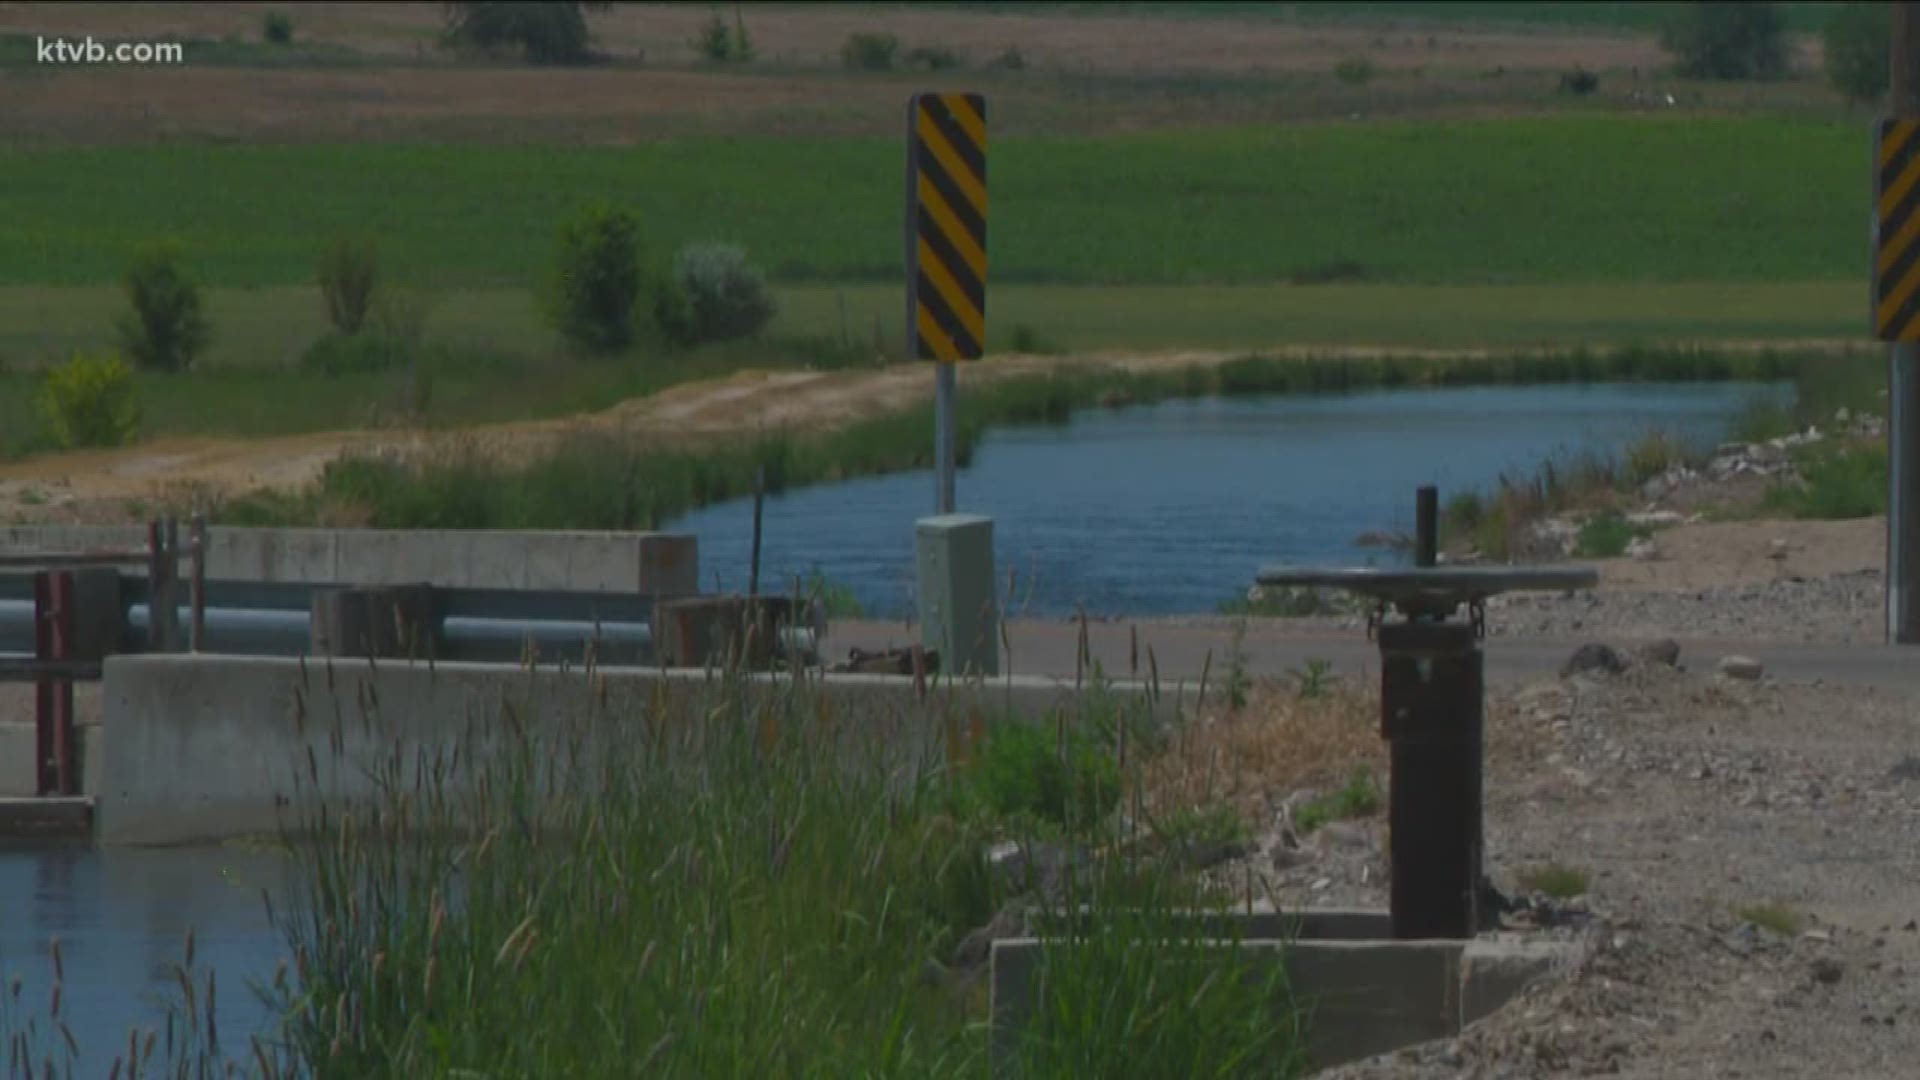 The boy was found in the water about three-quarters of a mile from his home.